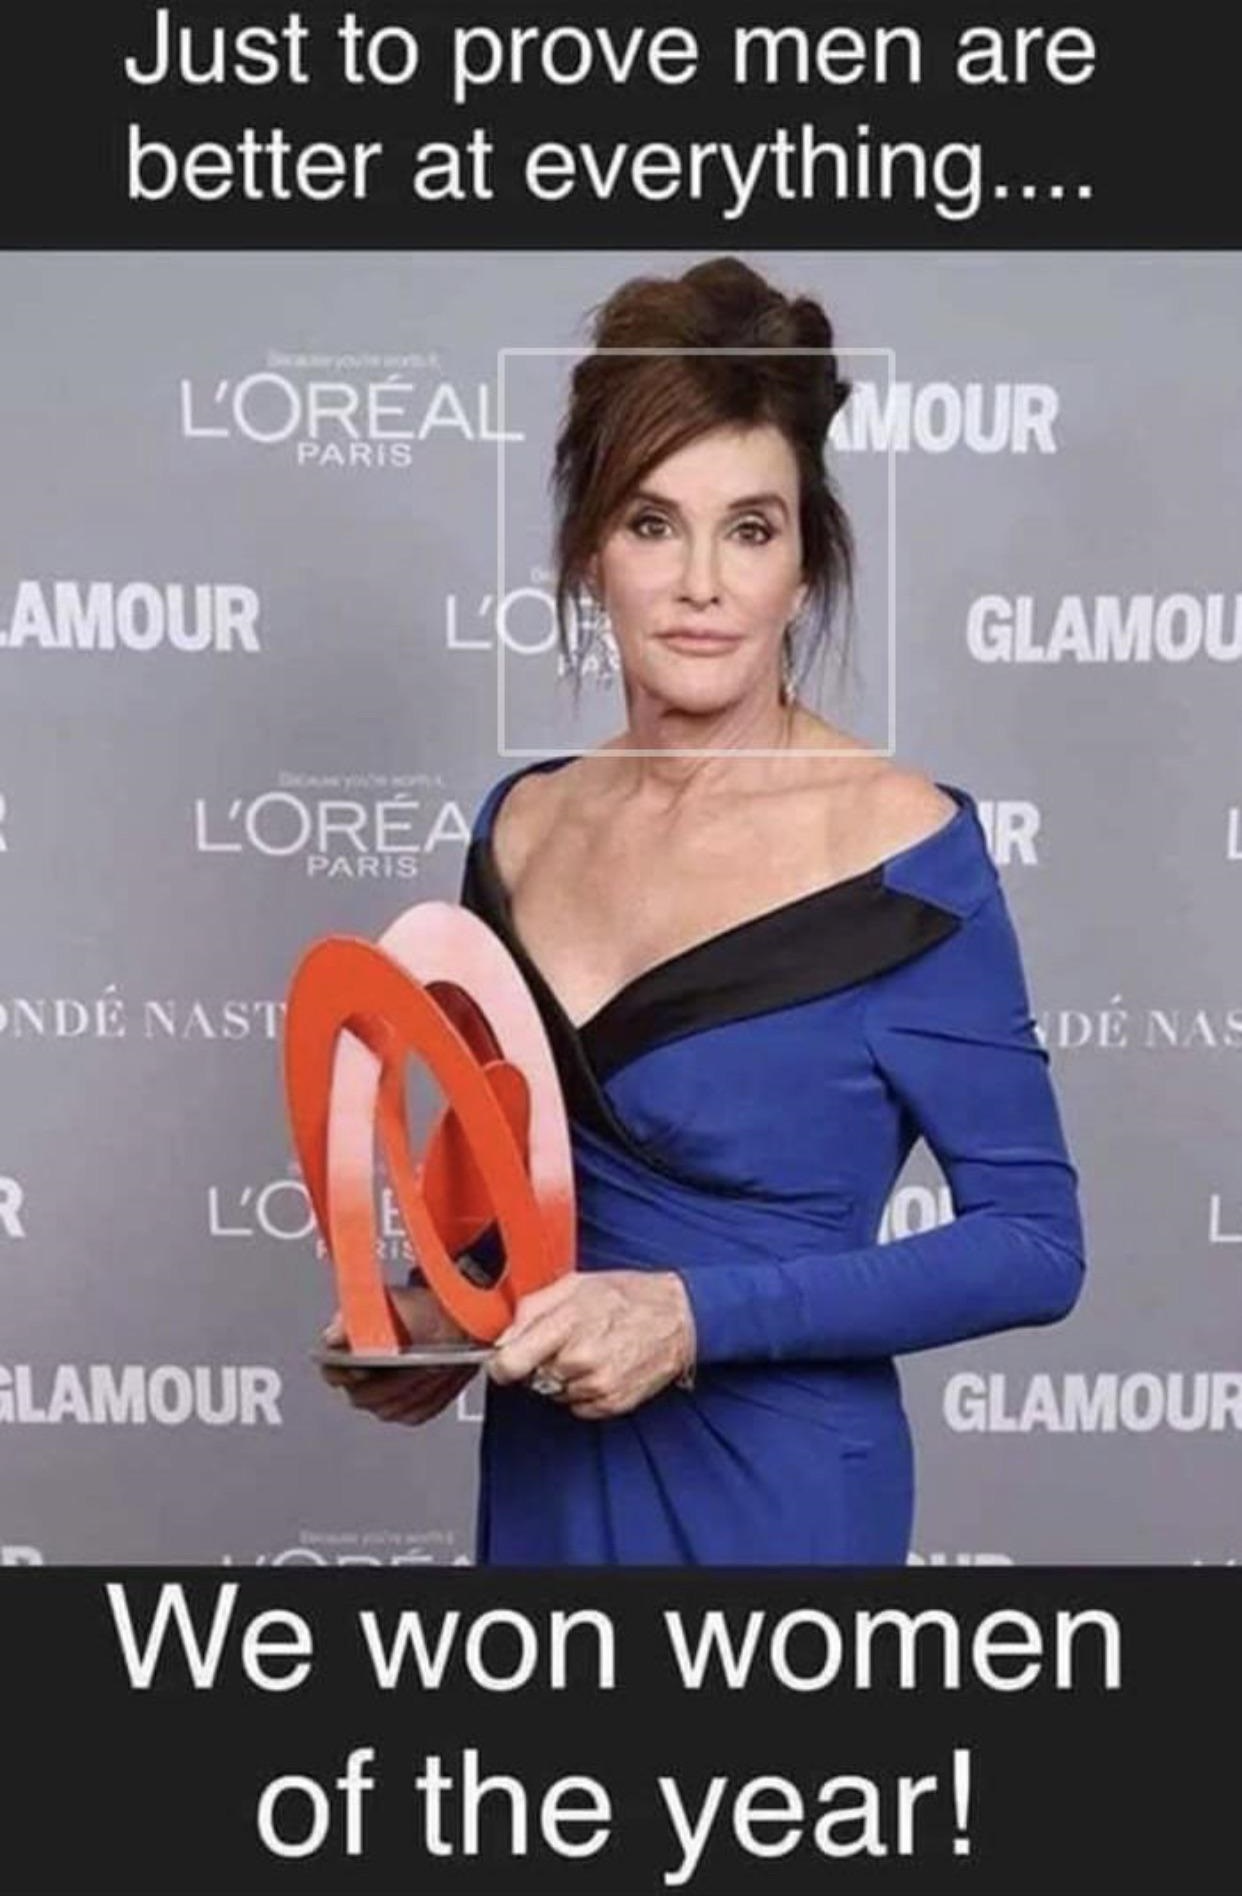 caitlyn jenner women of the year - Just to prove men are better at everything.... L'Oral Mour Paris Glamou Lamour Loh L'Ora Paris Nd Nast De Nas Glamour Glamour We won women of the year!